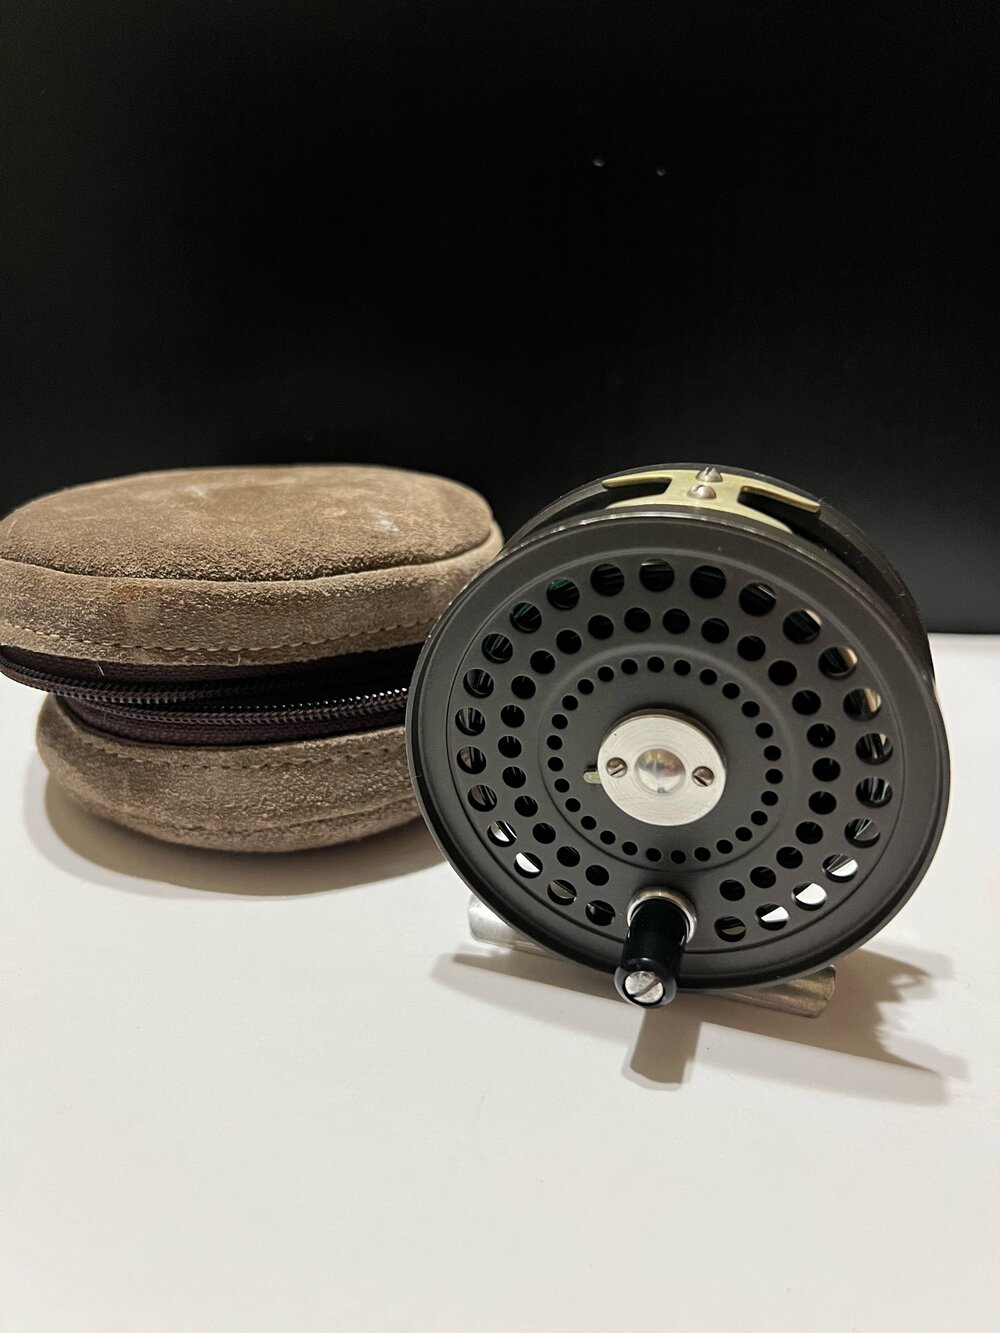 Orvis CFO III Fly Reel & Extra Spool with Case Made In England by